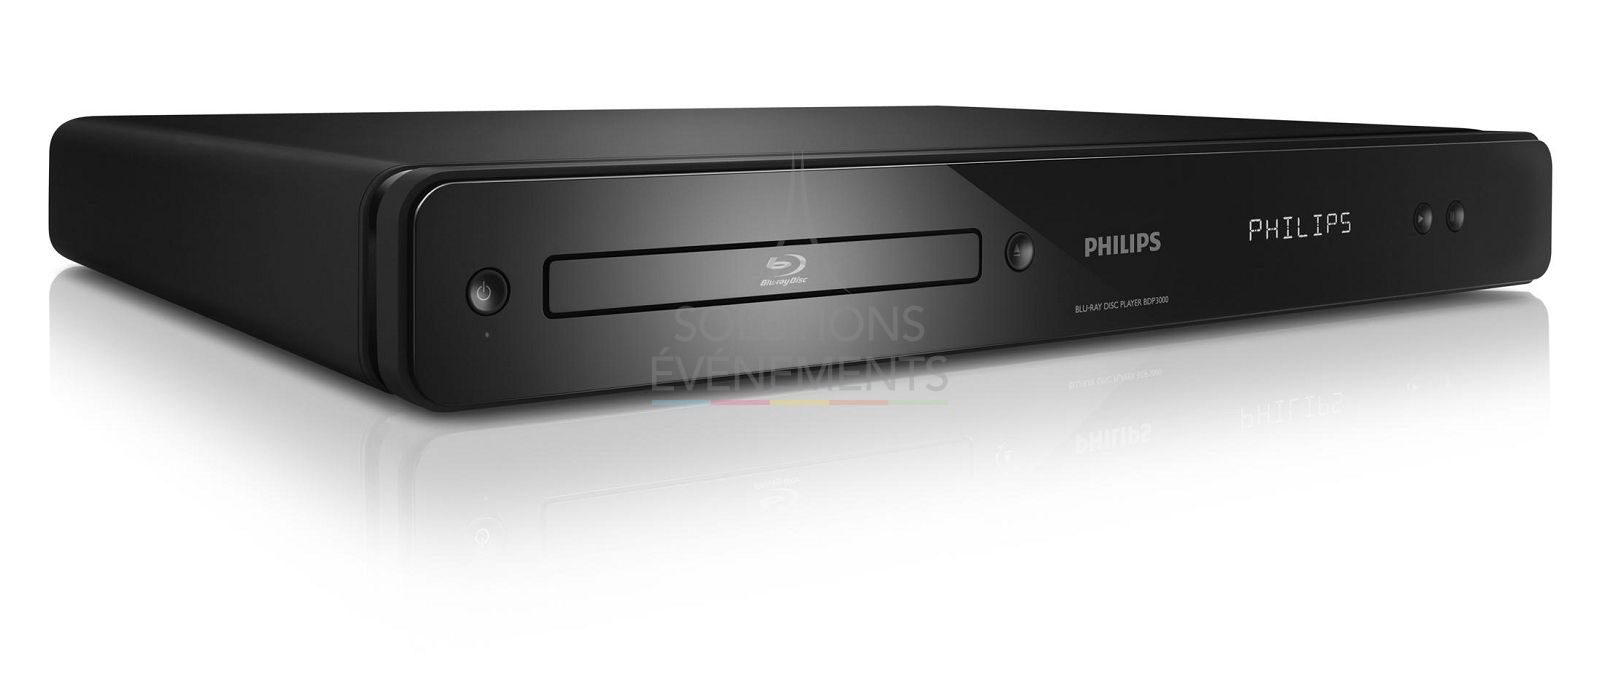 Rental of DVD/BLUE-RAY PLAYER